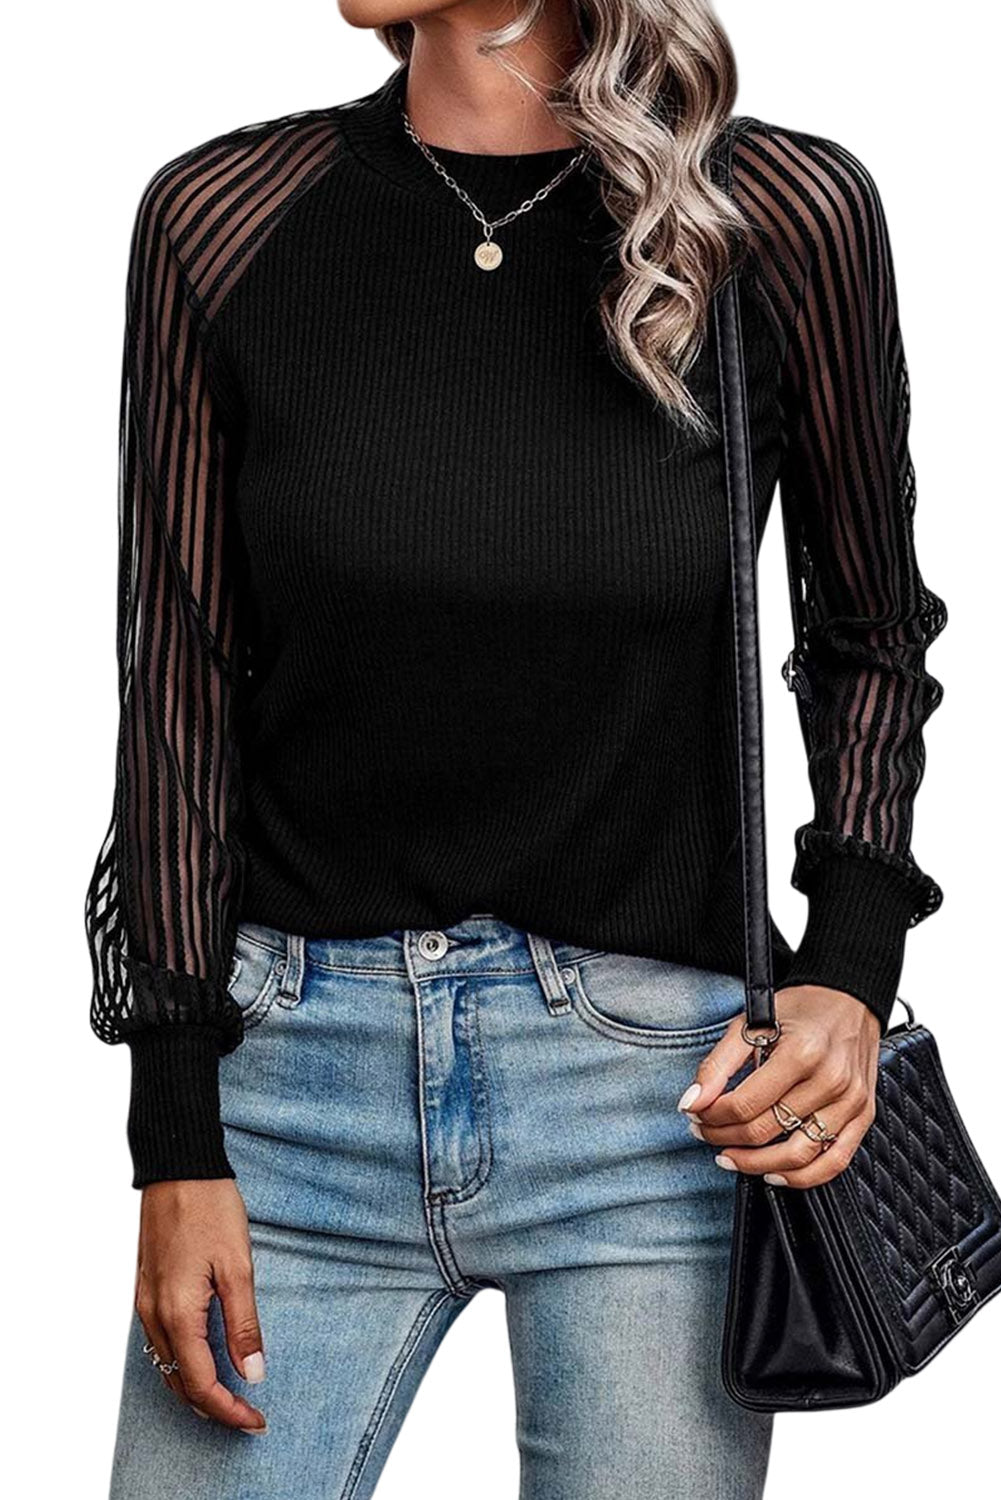 Black Ribbed Knit Sheer Striped Sleeve Plus Size Top